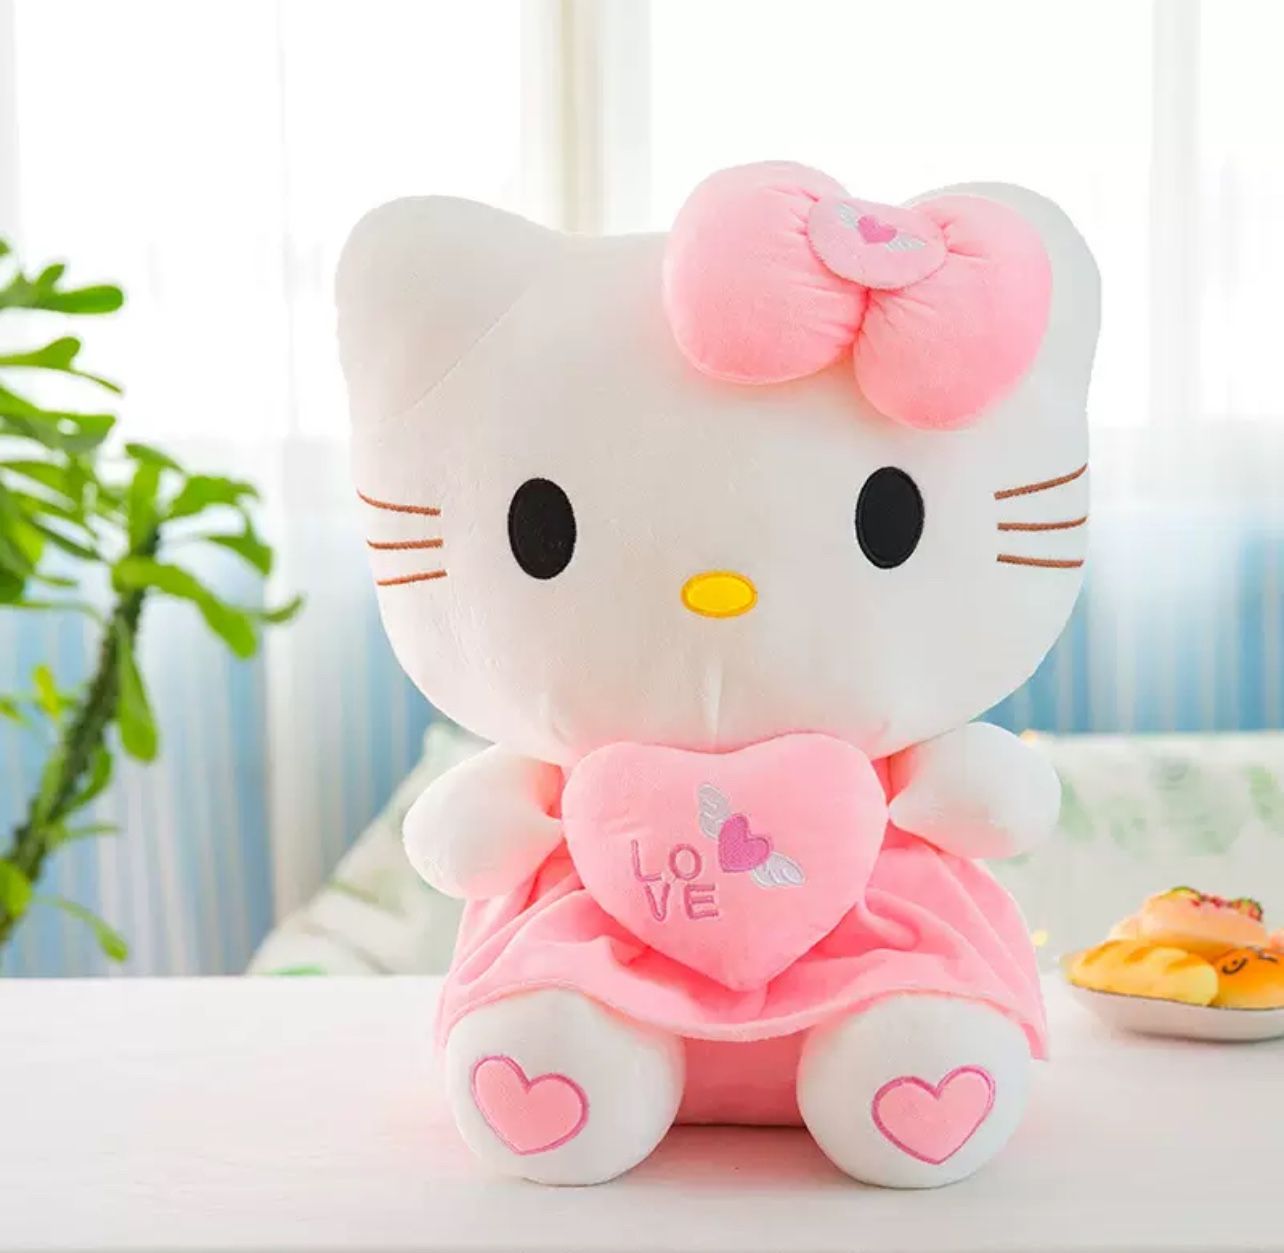 Hello Kitty Plush Toys, Cute Soft Doll Toys, Birthday Gifts for Girls (Pink C, 40CM)